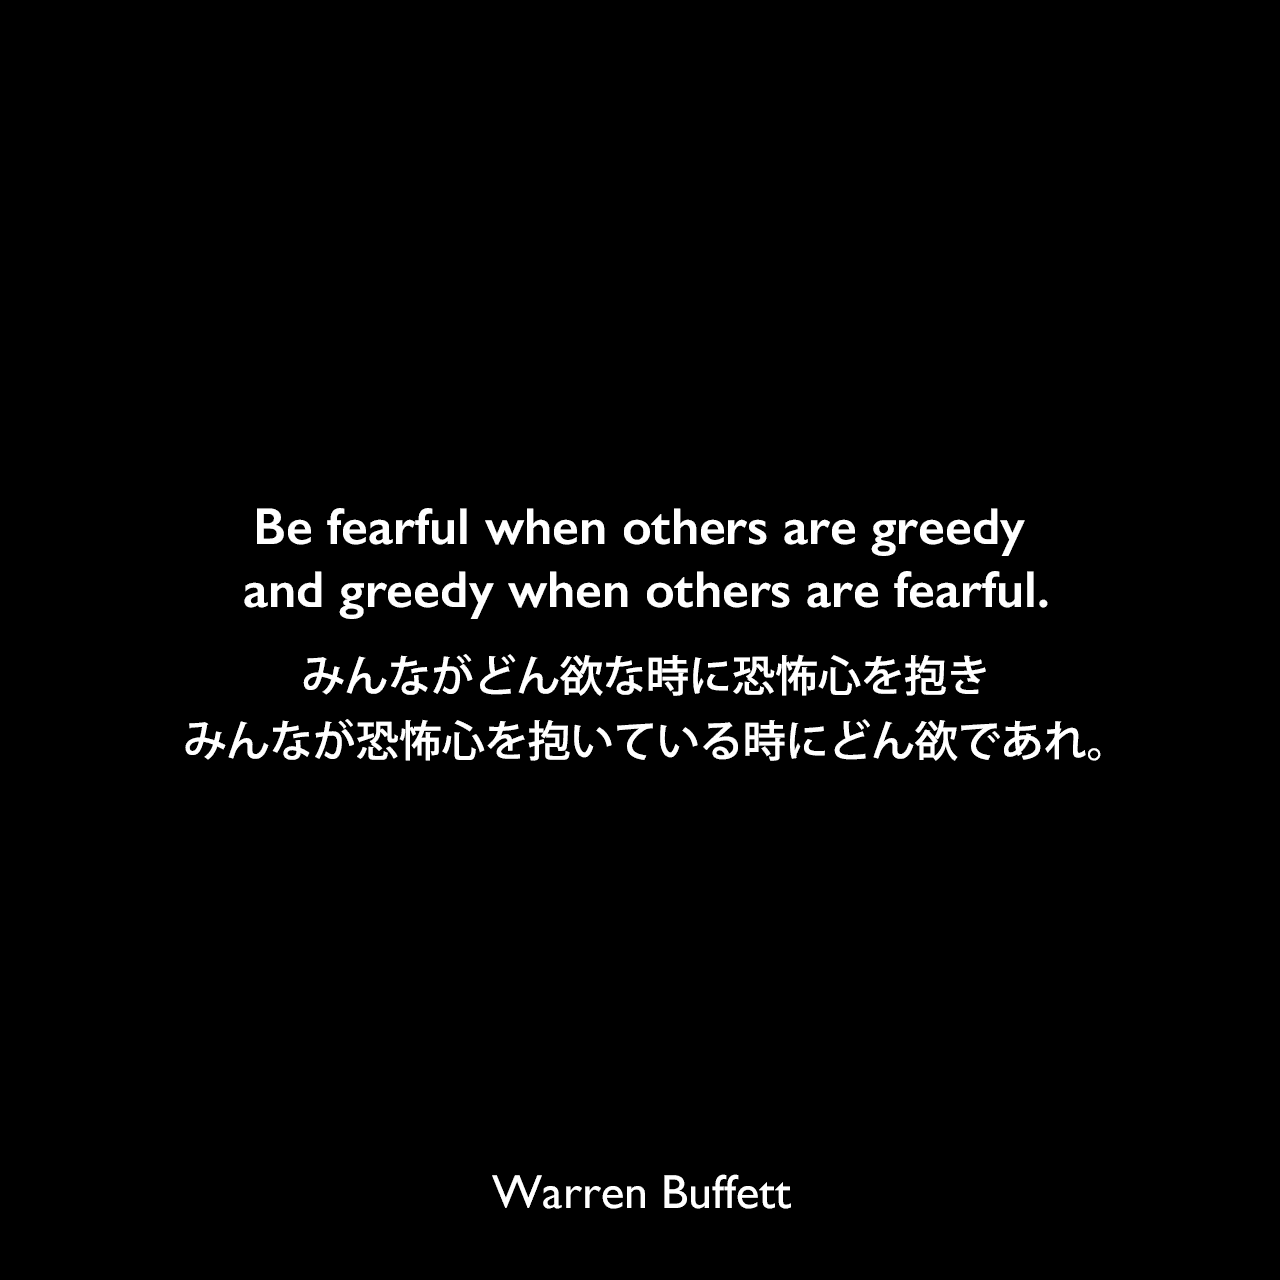 Be fearful when others are greedy and greedy when others are fearful.みんながどん欲な時に恐怖心を抱き、みんなが恐怖心を抱いている時にどん欲であれ。Warren Buffett